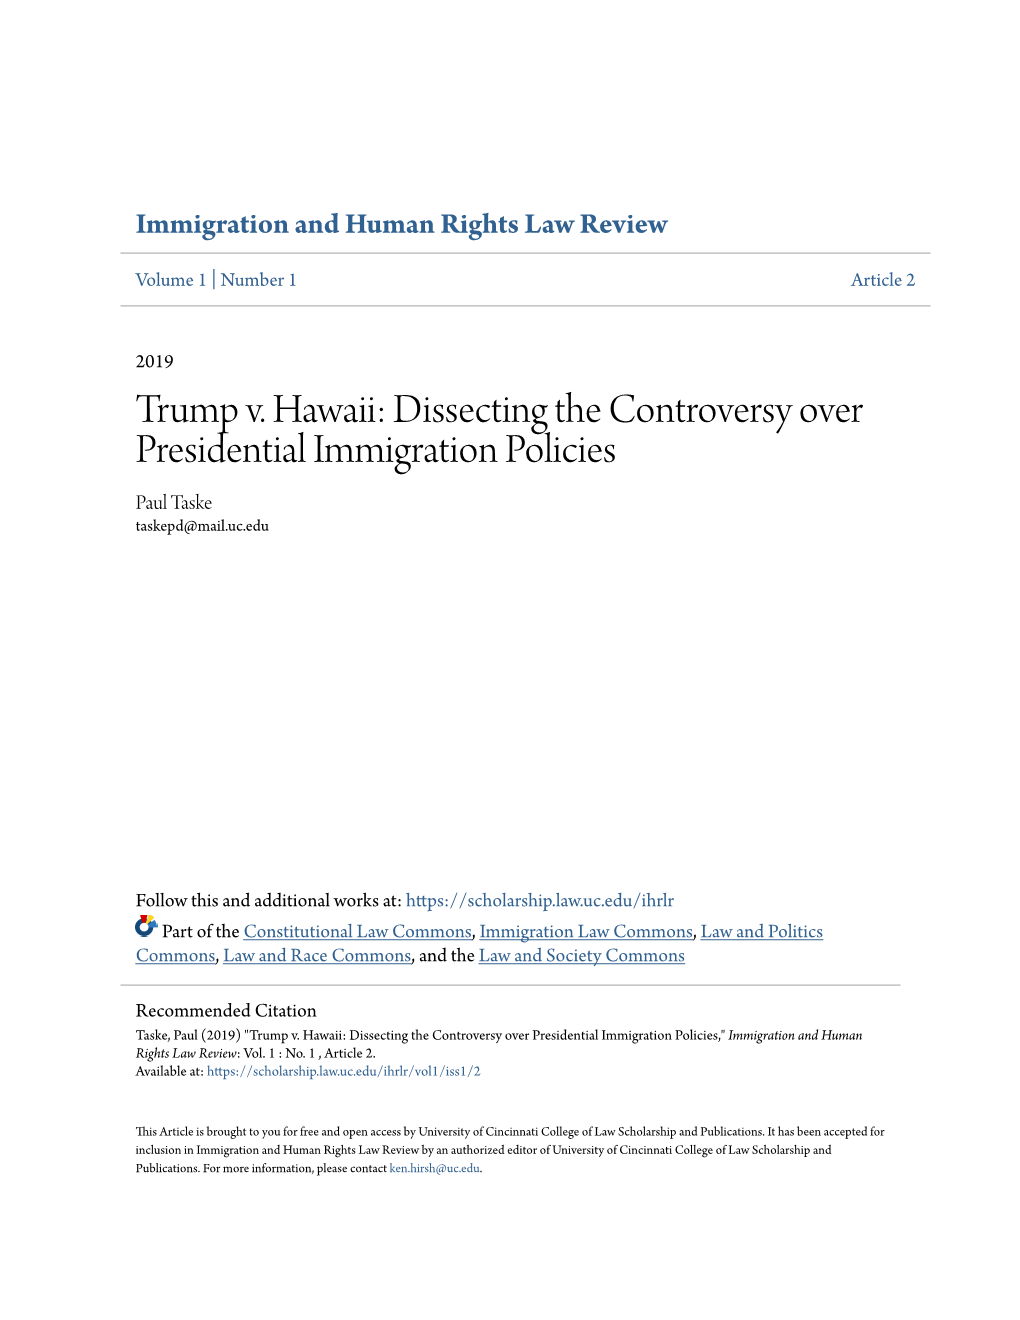 Trump V. Hawaii: Dissecting the Controversy Over Presidential Immigration Policies Paul Taske Taskepd@Mail.Uc.Edu